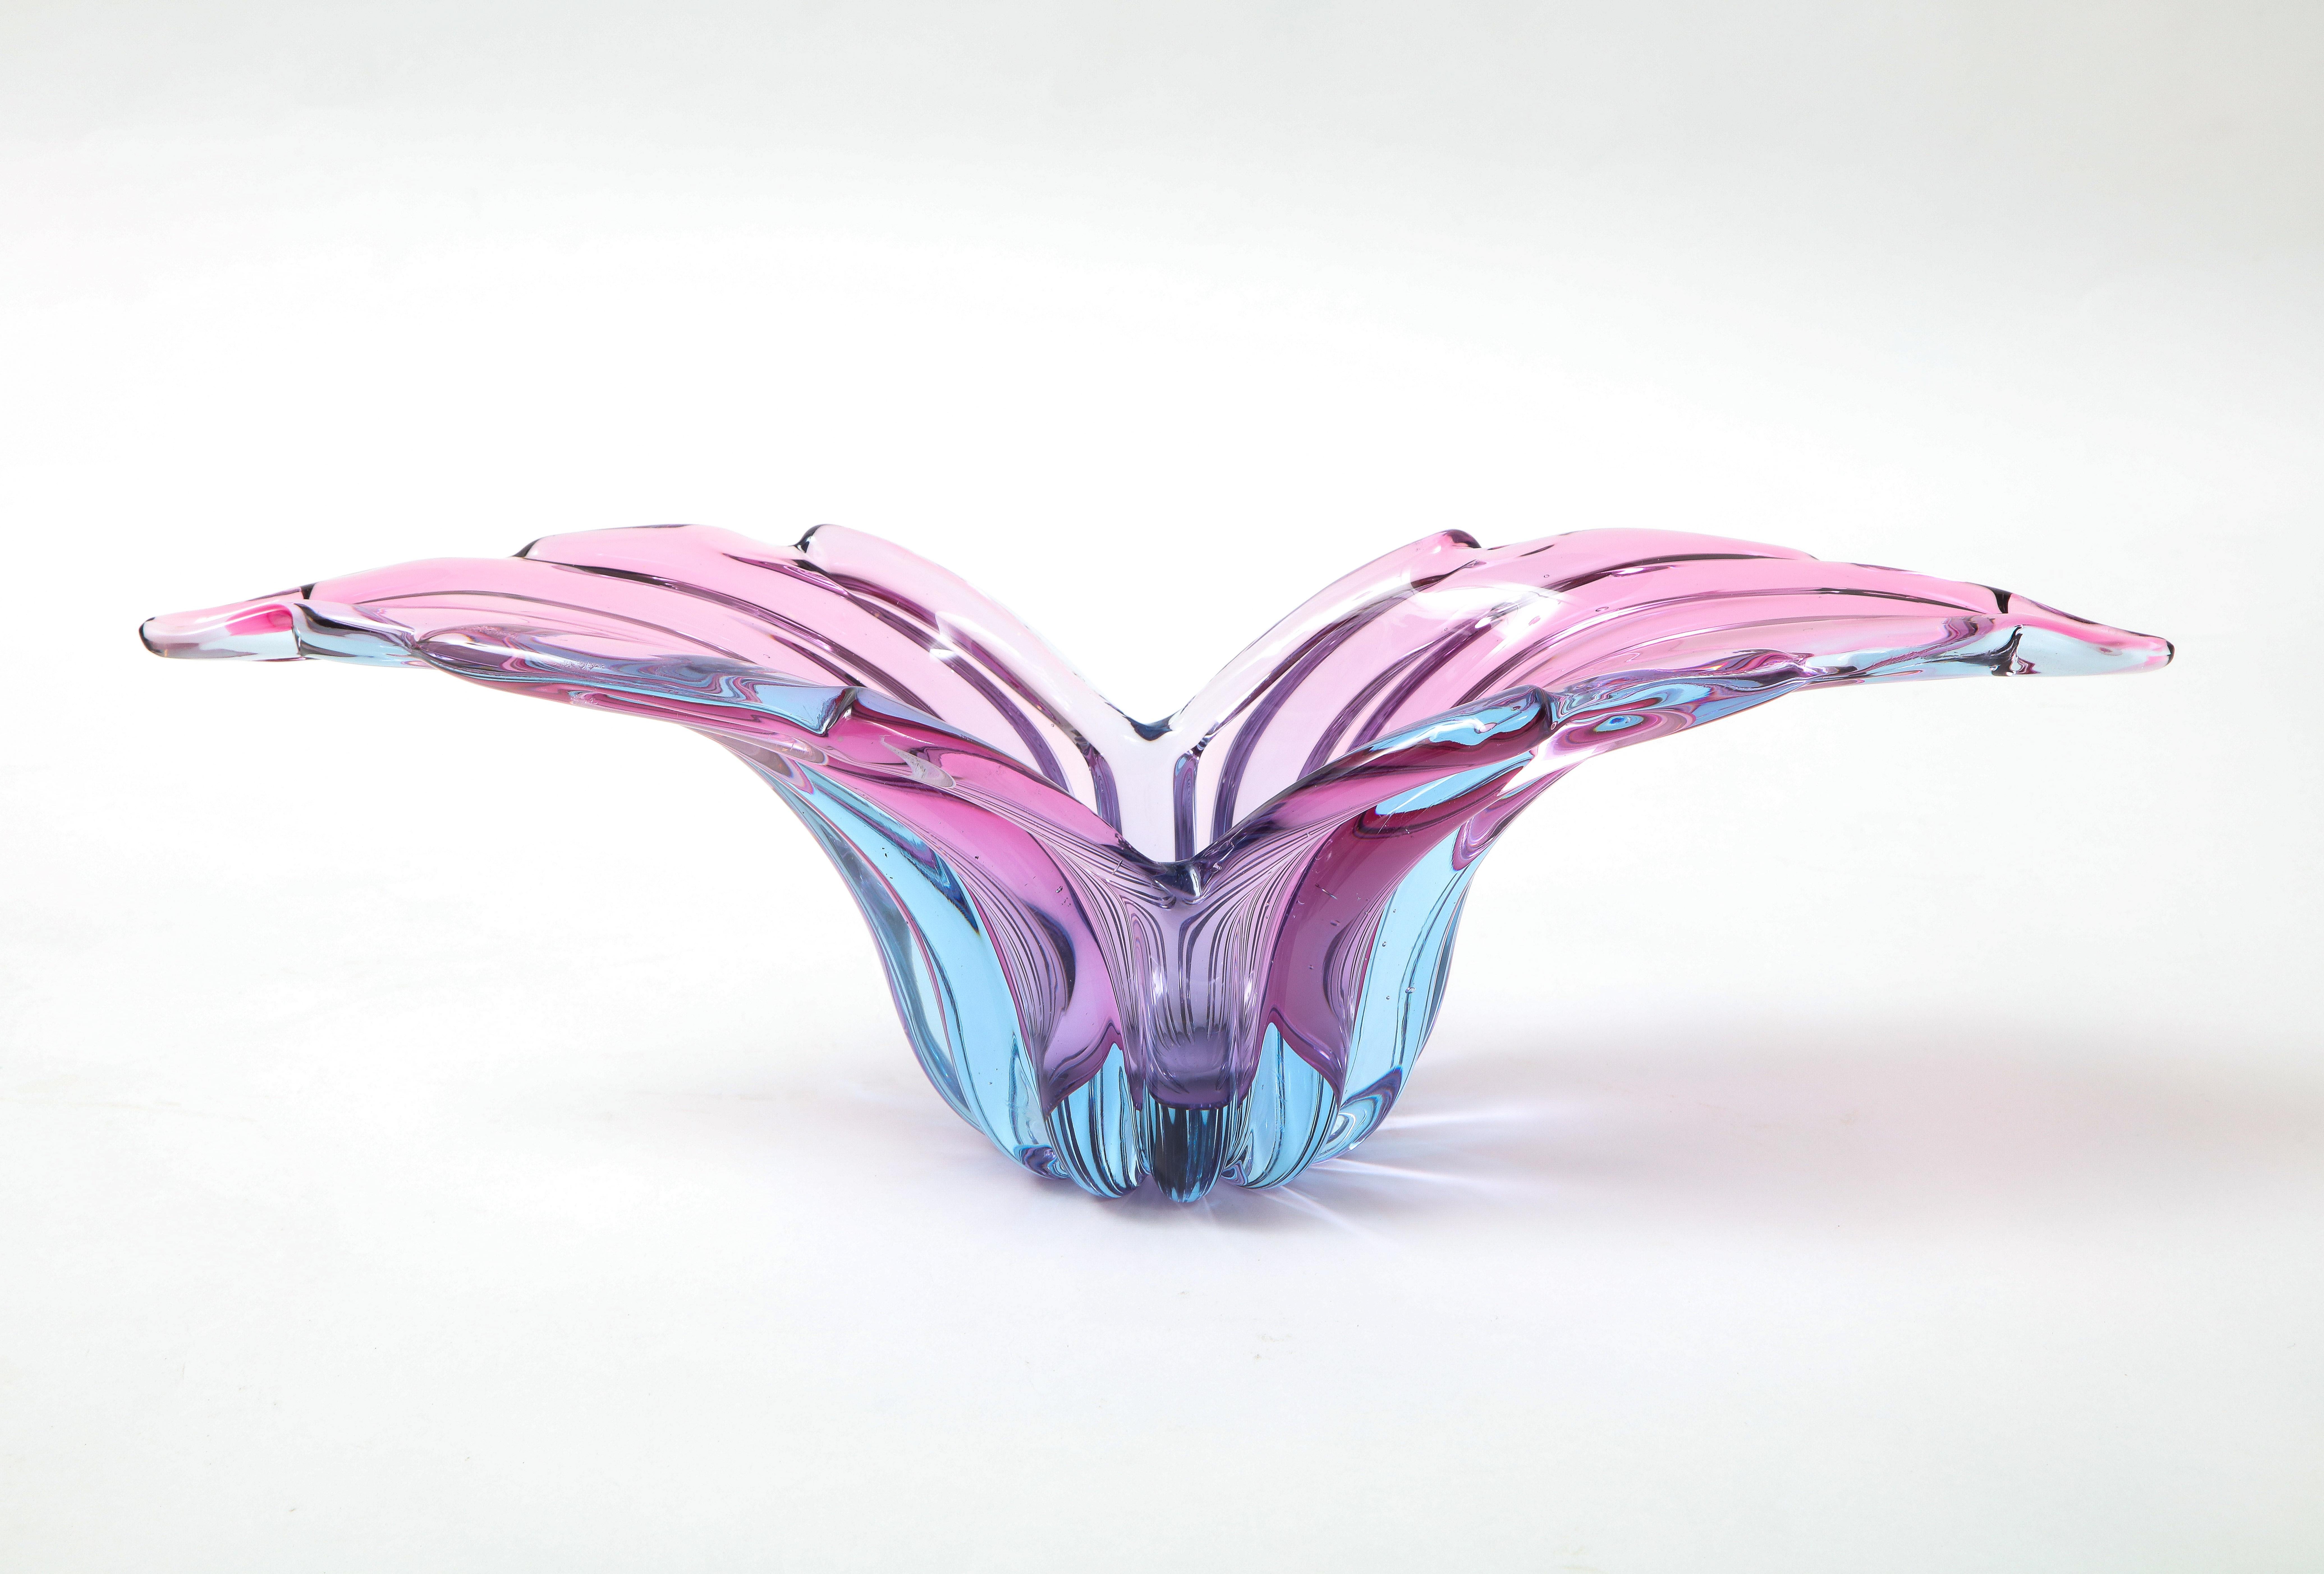 Murano art glass vessel showcasing a gored body and an ombre effect of purples and magenta.